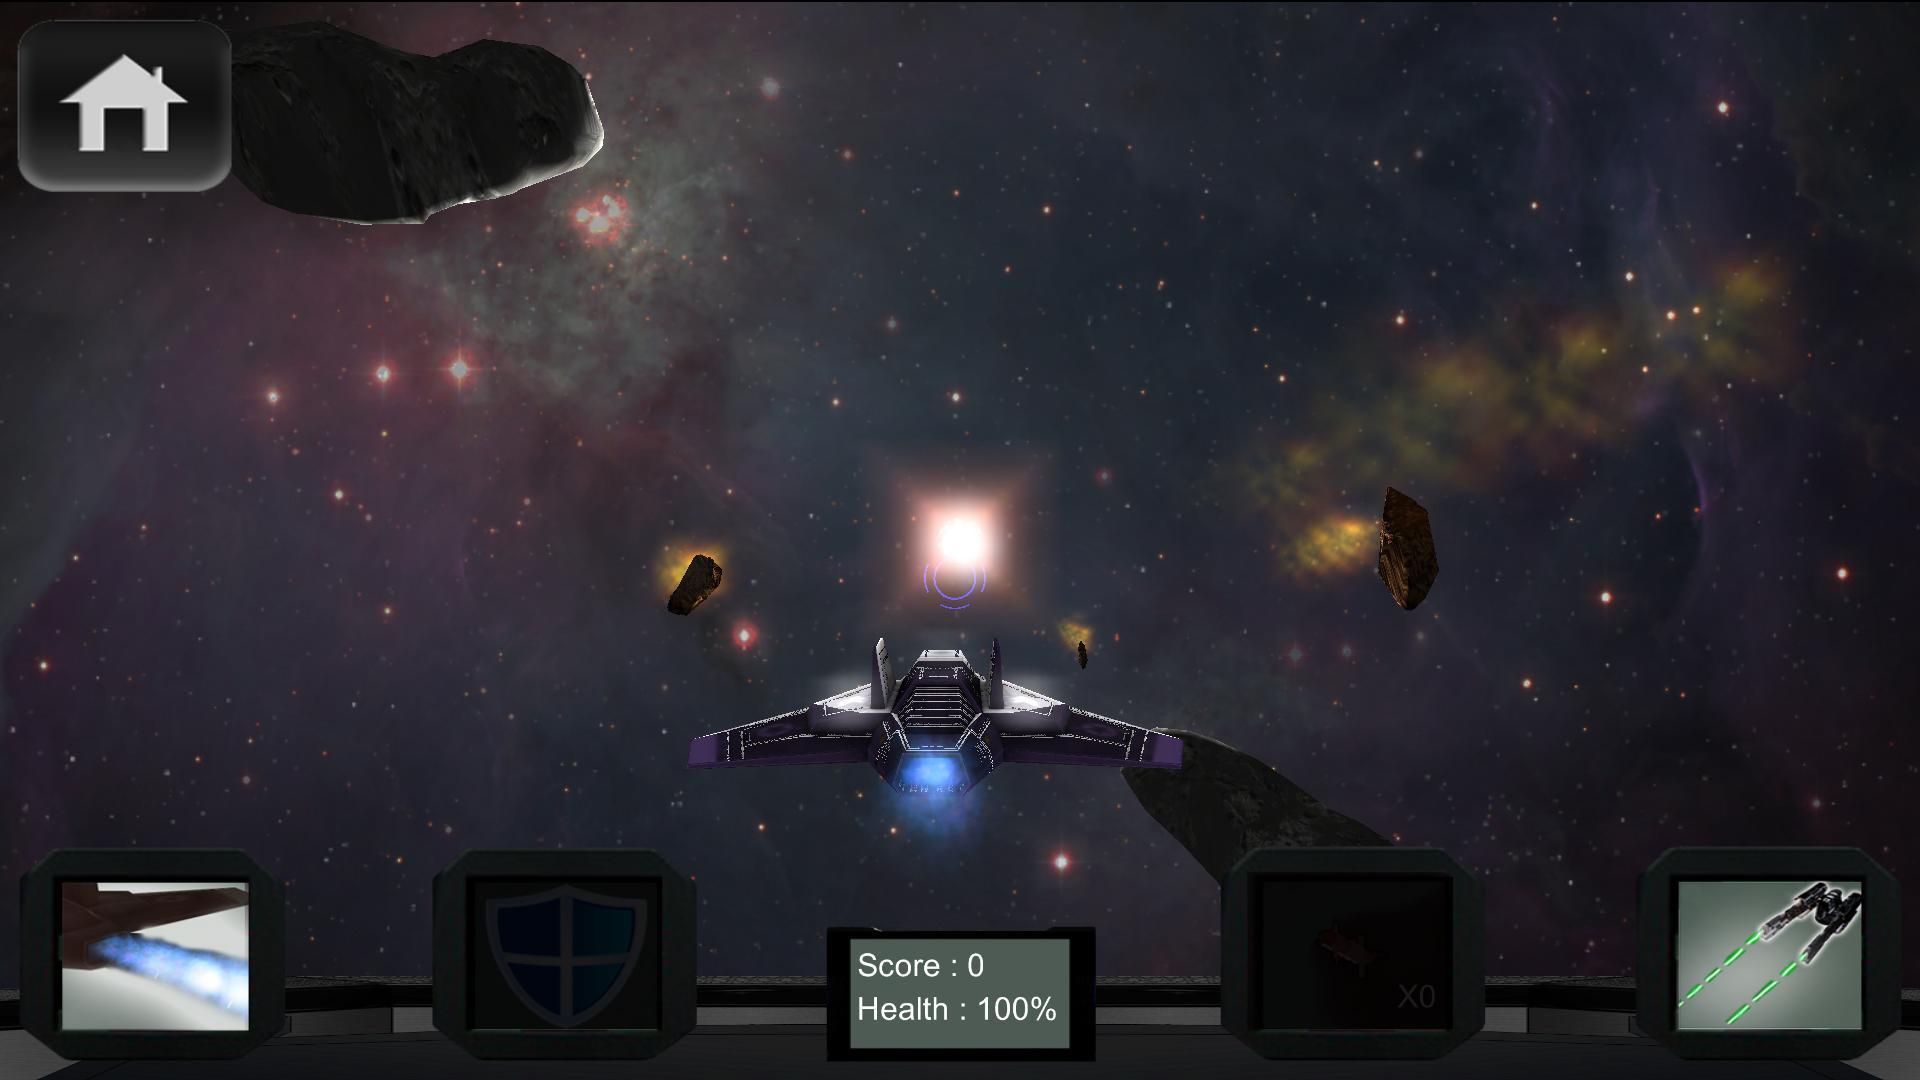 Game space на андроид. Space Fighter игра. Shoot 'em up космос истребитель. Endless Space Android. Last Space Fighter.